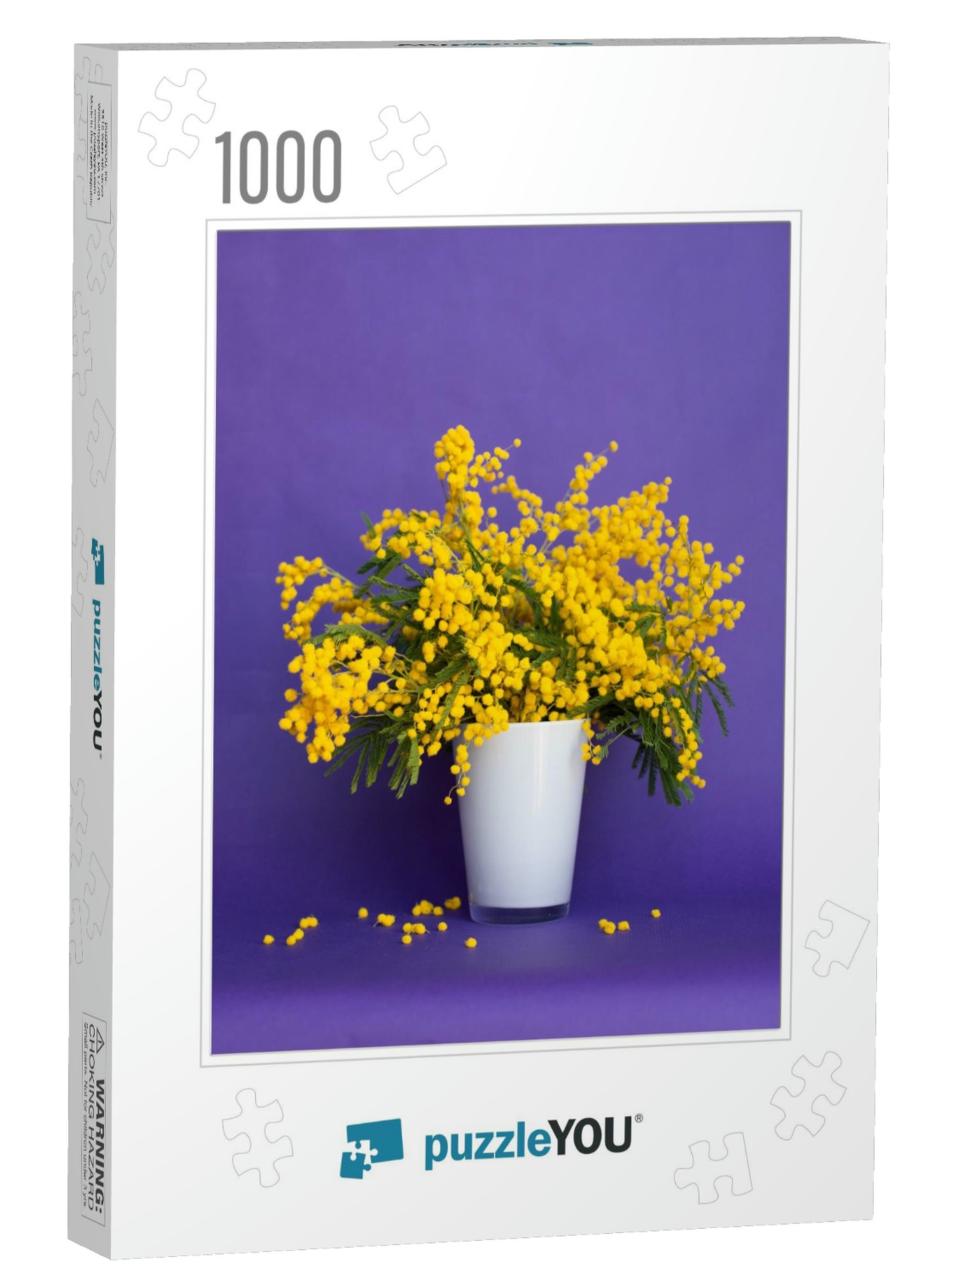 Mimosa. Yellow Flowers in a White Vase on a Purple Backgr... Jigsaw Puzzle with 1000 pieces